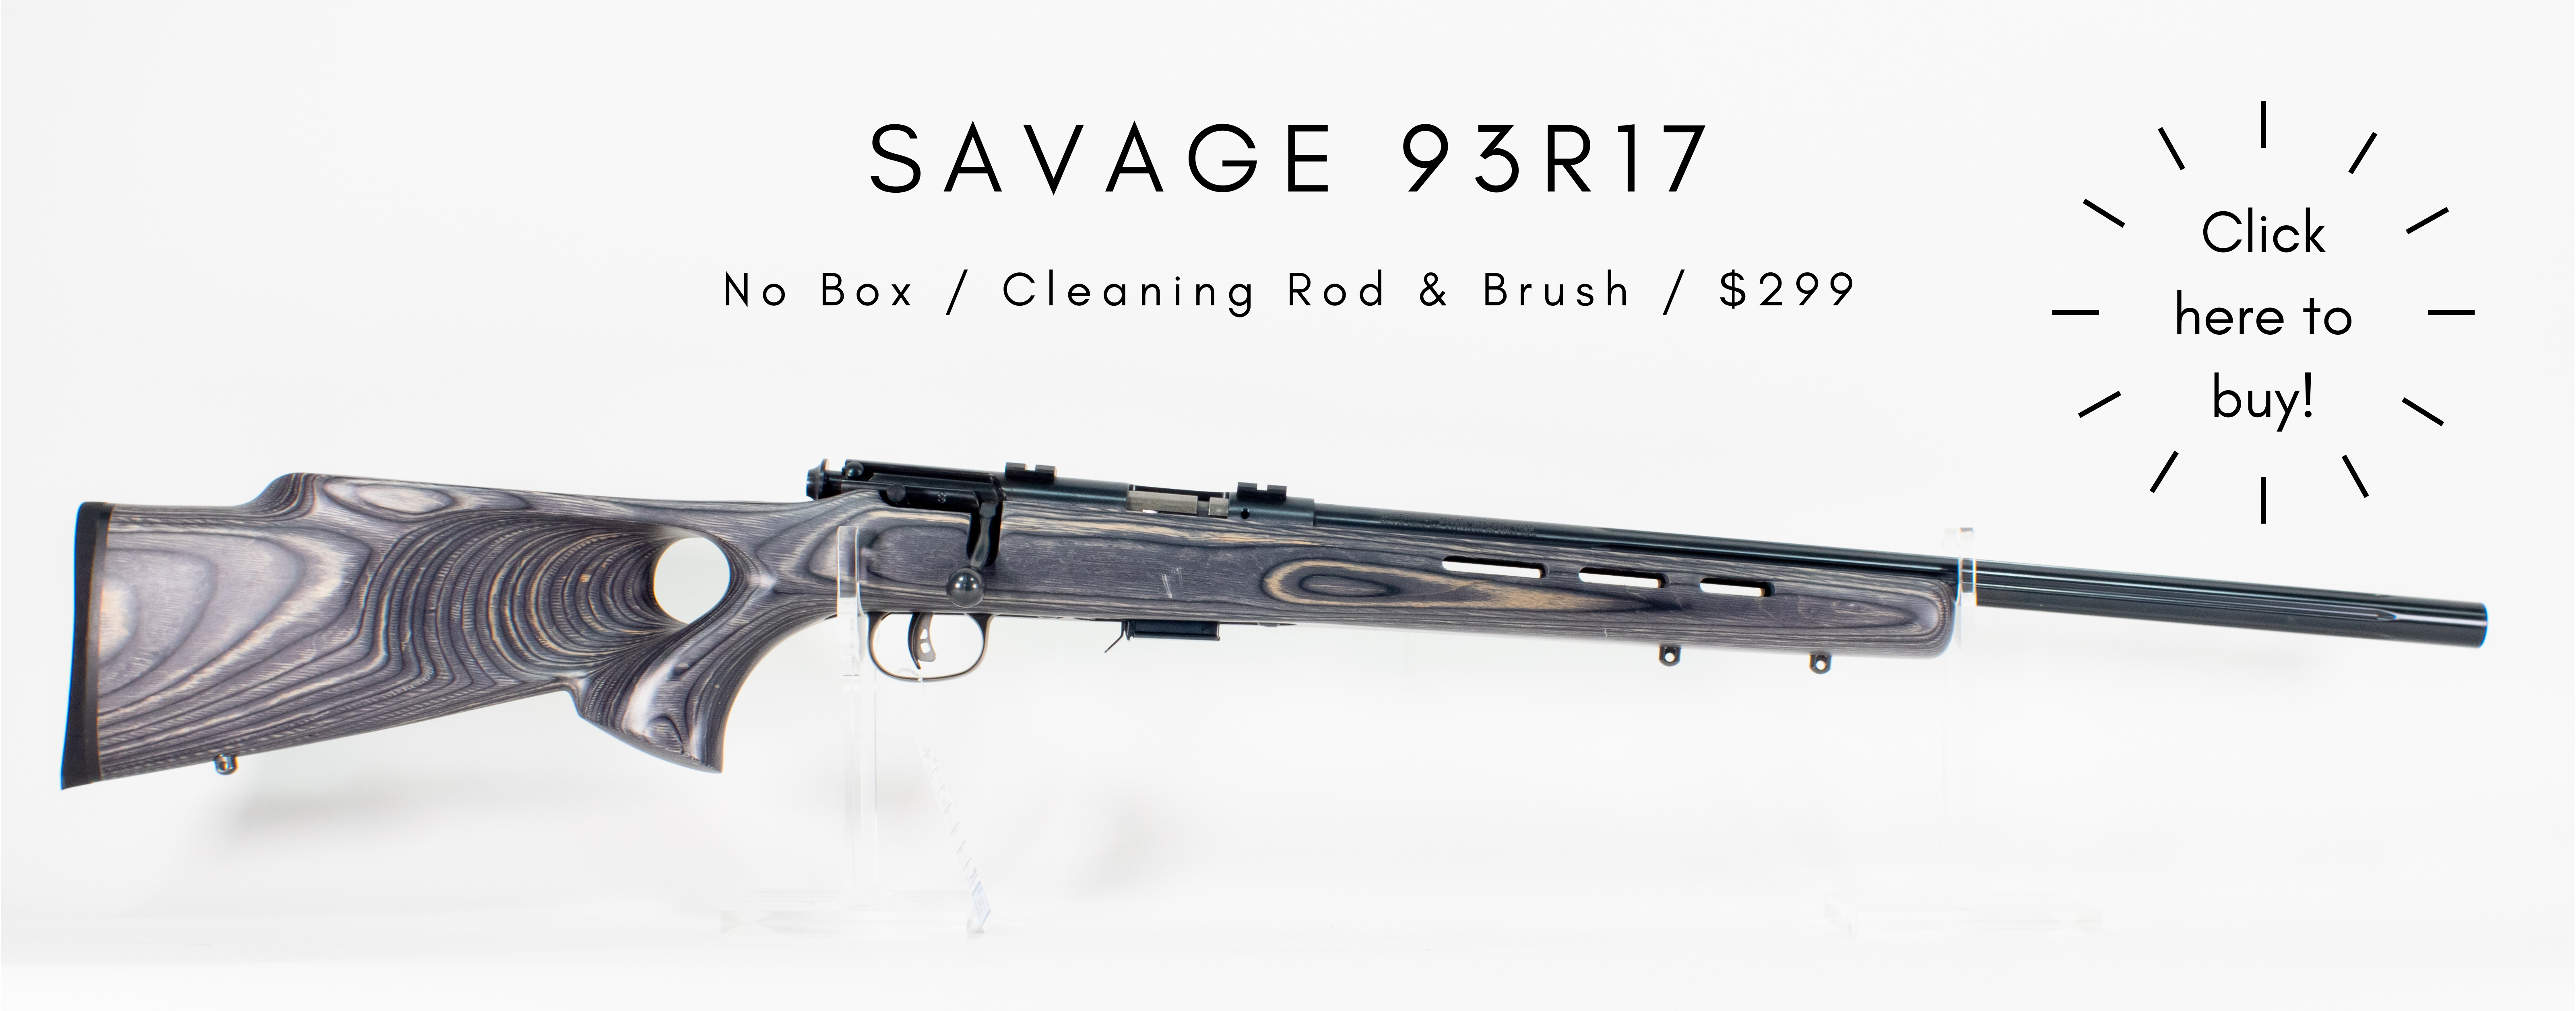 https://www.lancotactical.com/products/savage-2957